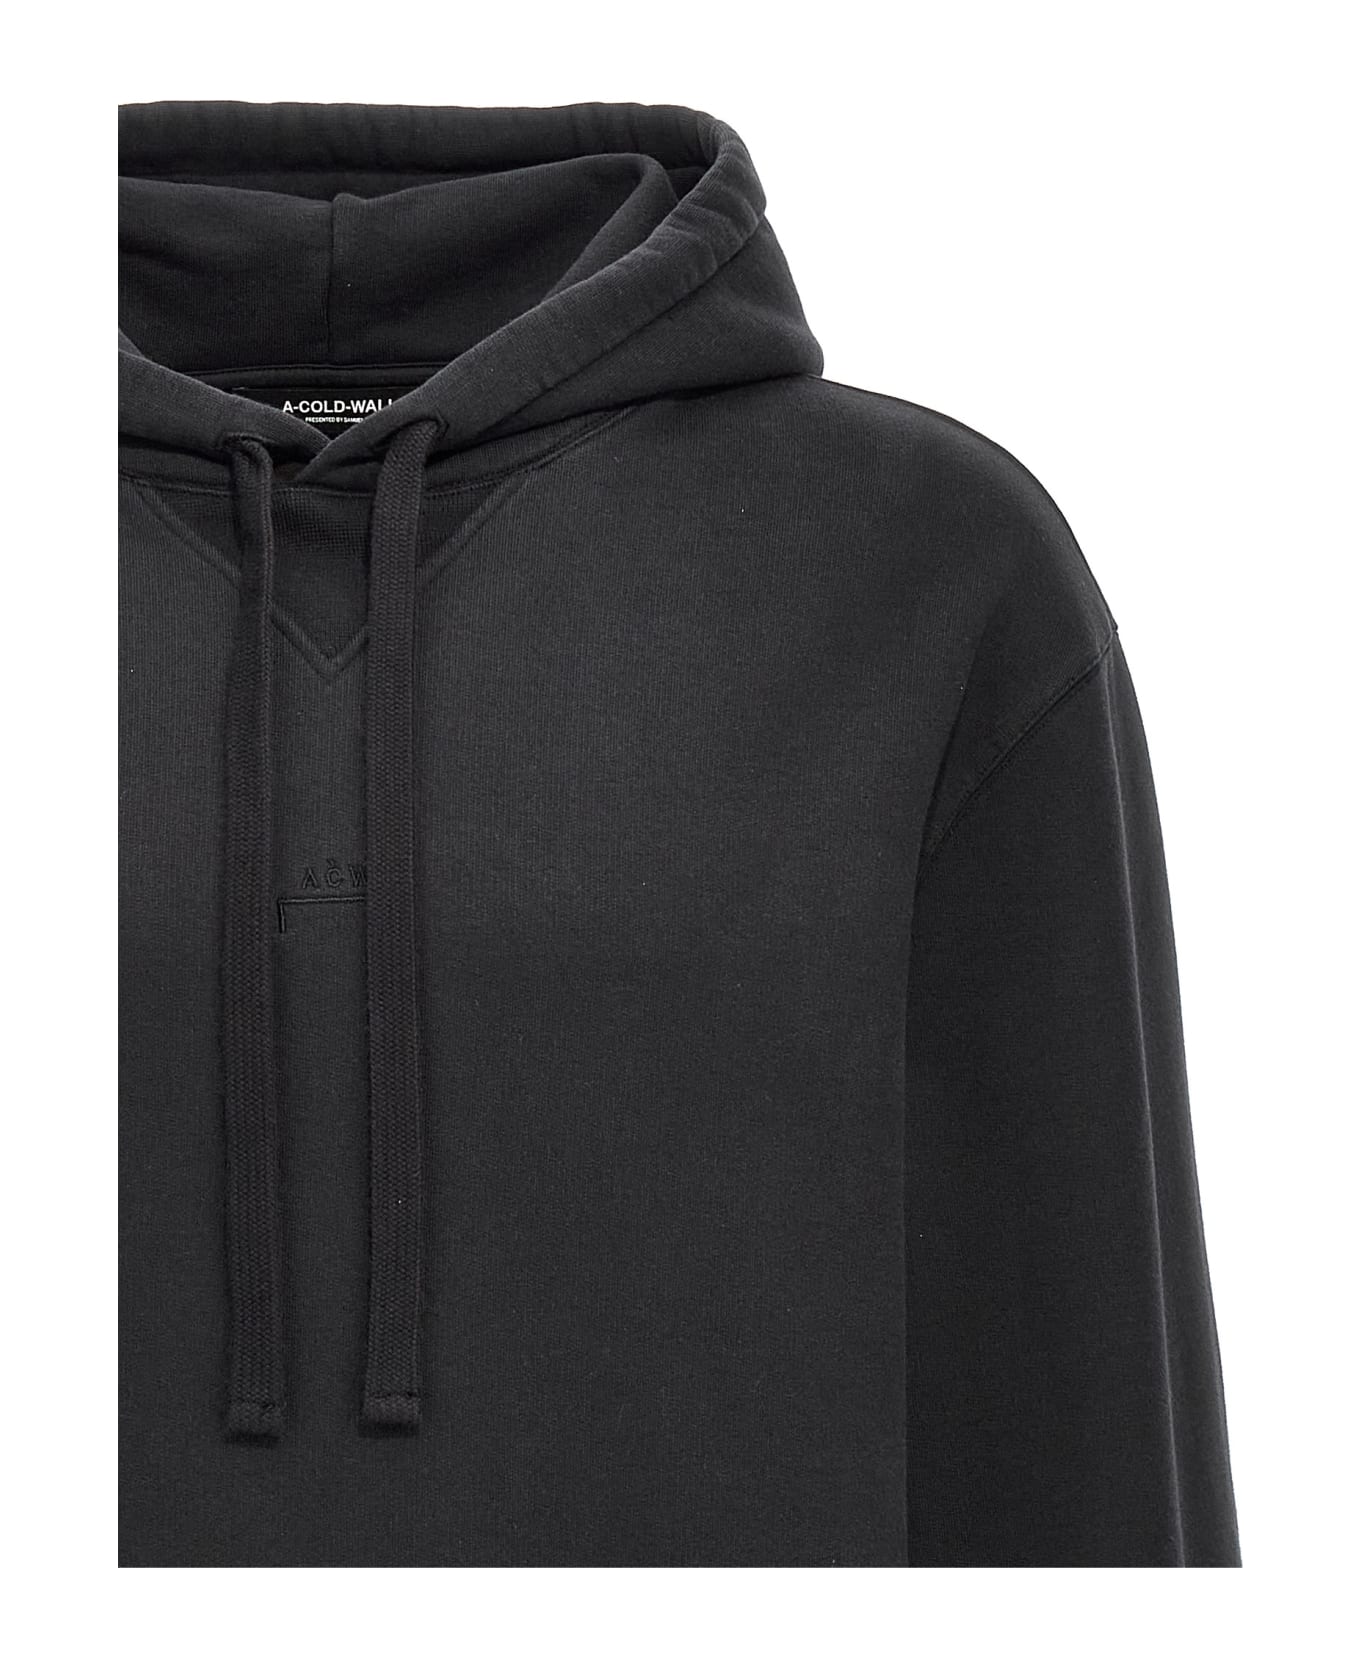 A-COLD-WALL 'essential' Hoodie - Black  